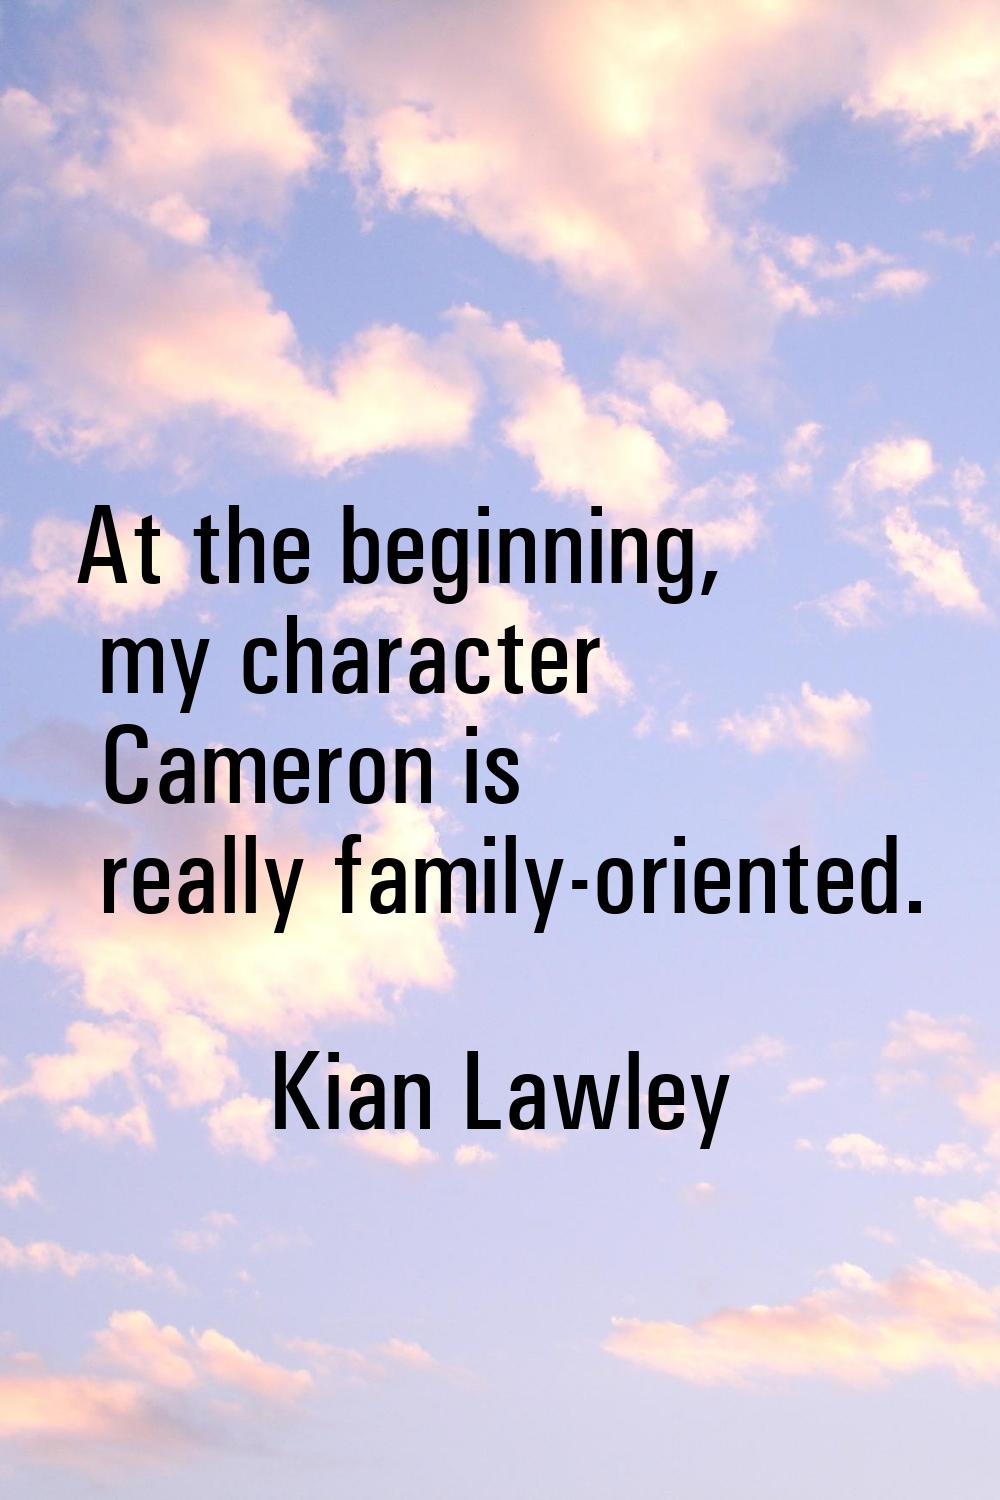 At the beginning, my character Cameron is really family-oriented.